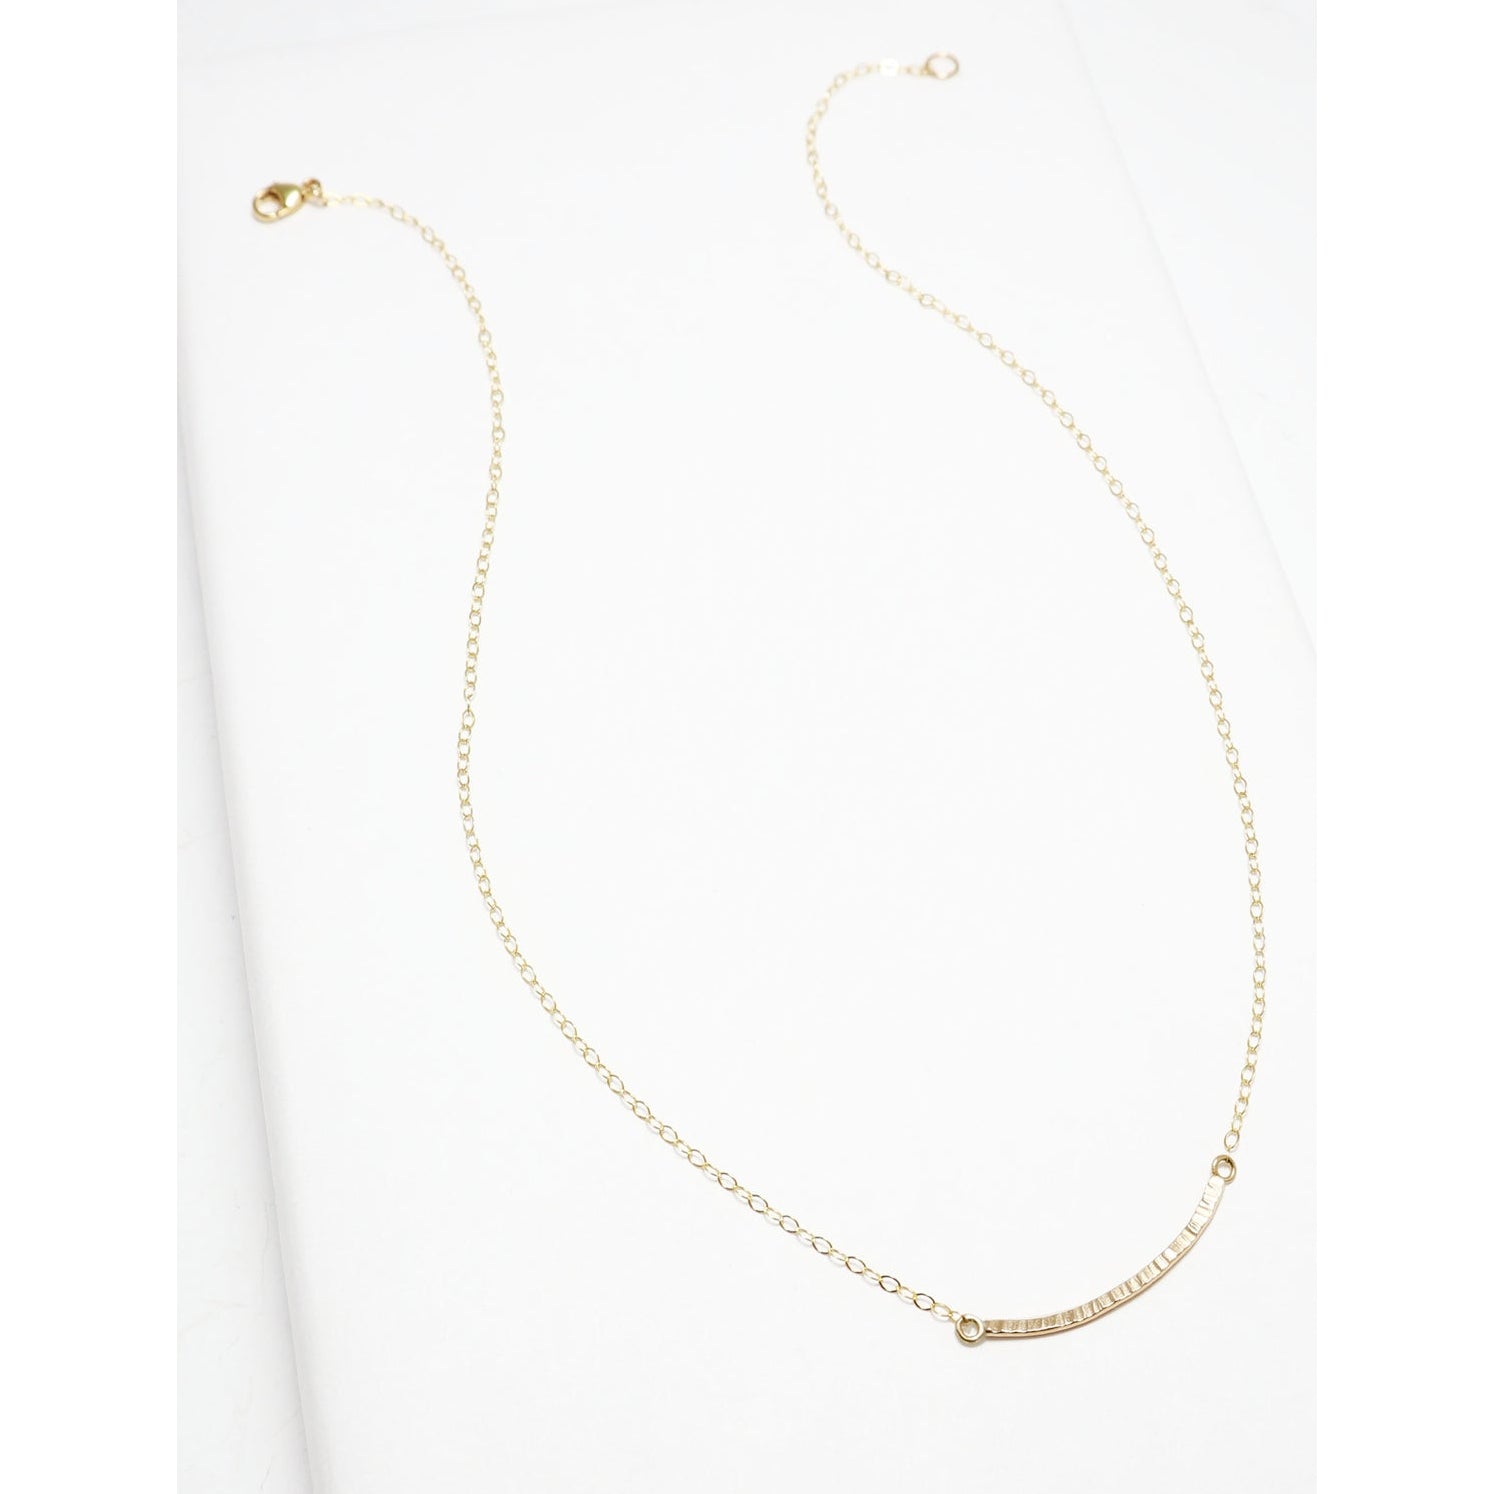 Accent Short Curved Line Hammered Necklace